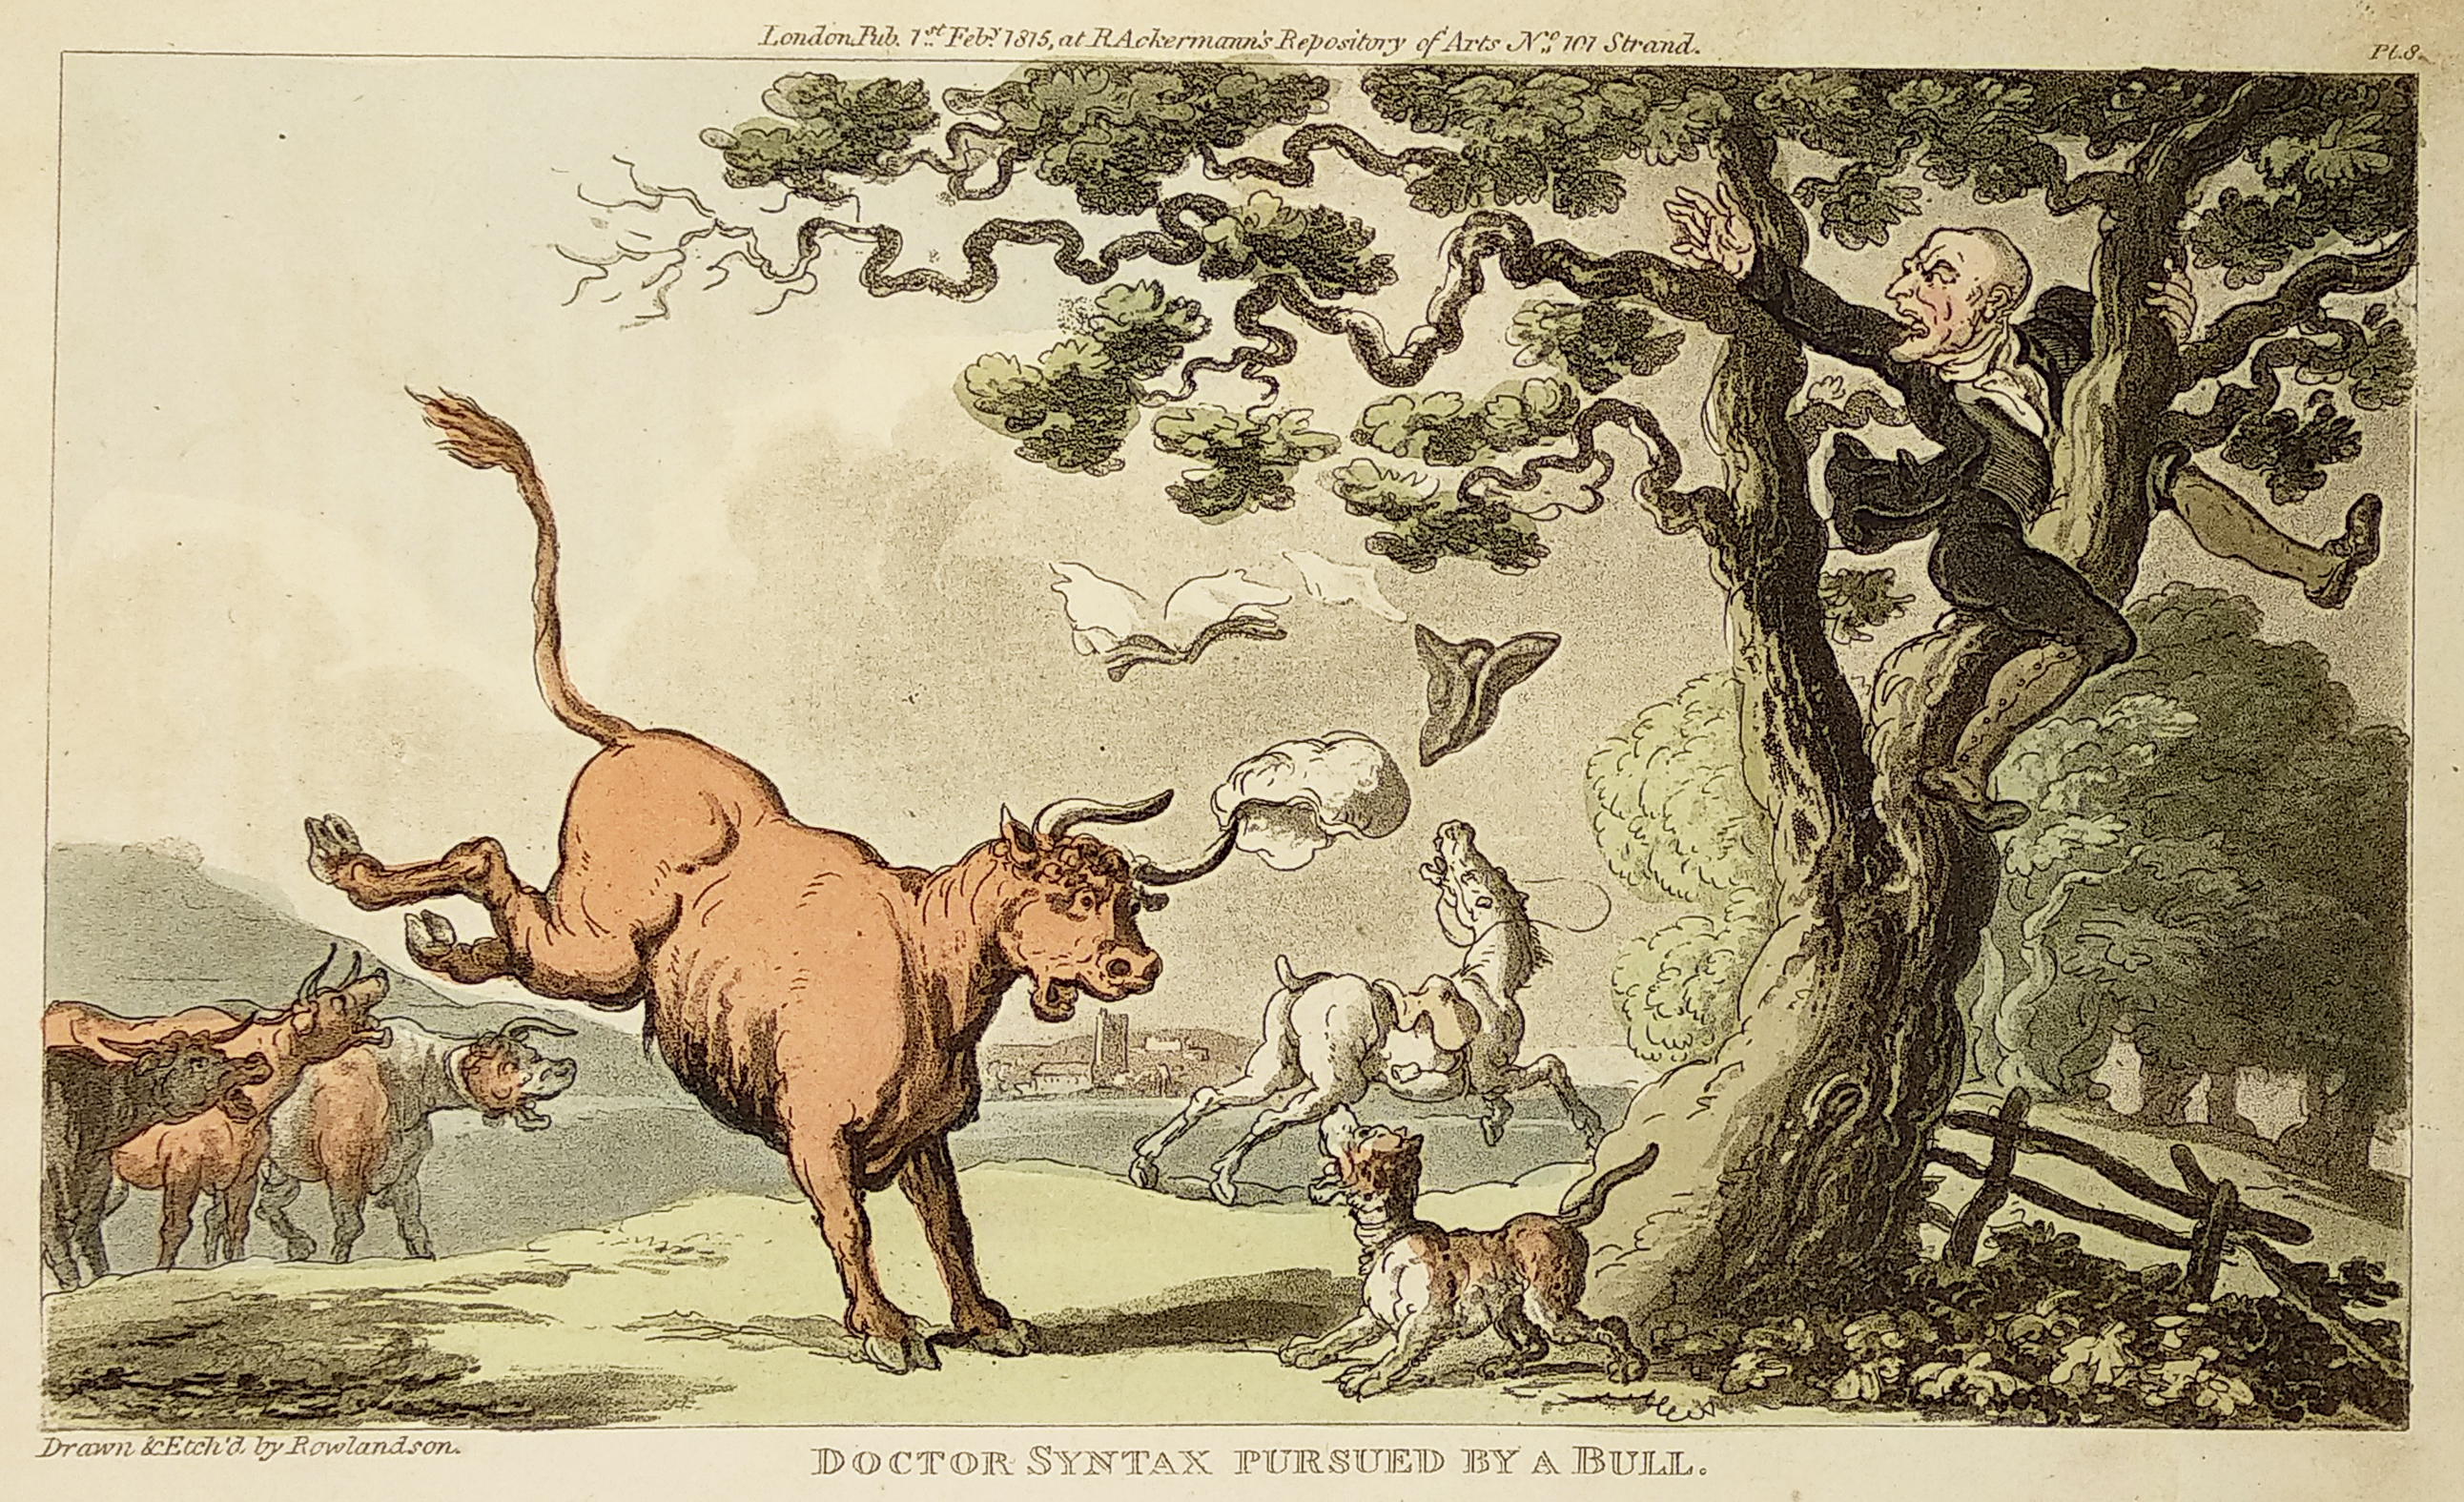 Doctor Syntax Pursued by a bull. - Antique Print from 1815